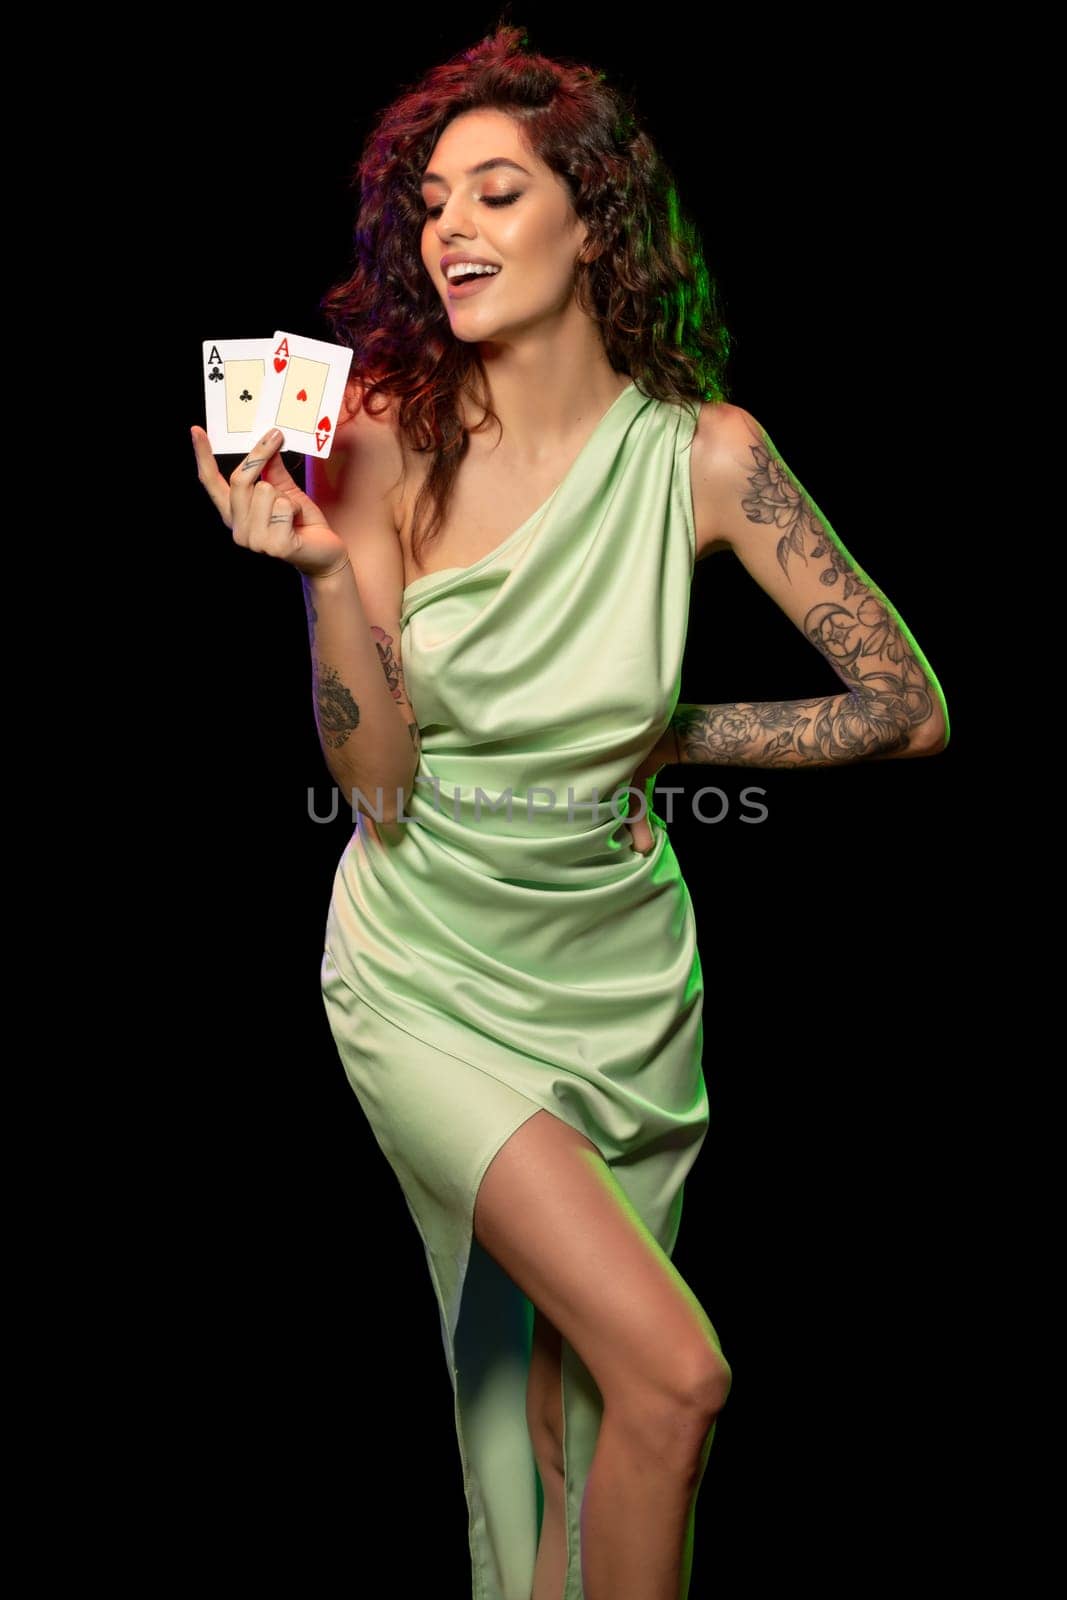 Portrait of cheerful young brunette with wavy hair wearing elegant light green dress, holding two aces in hands, posing against black background. Poker win concept